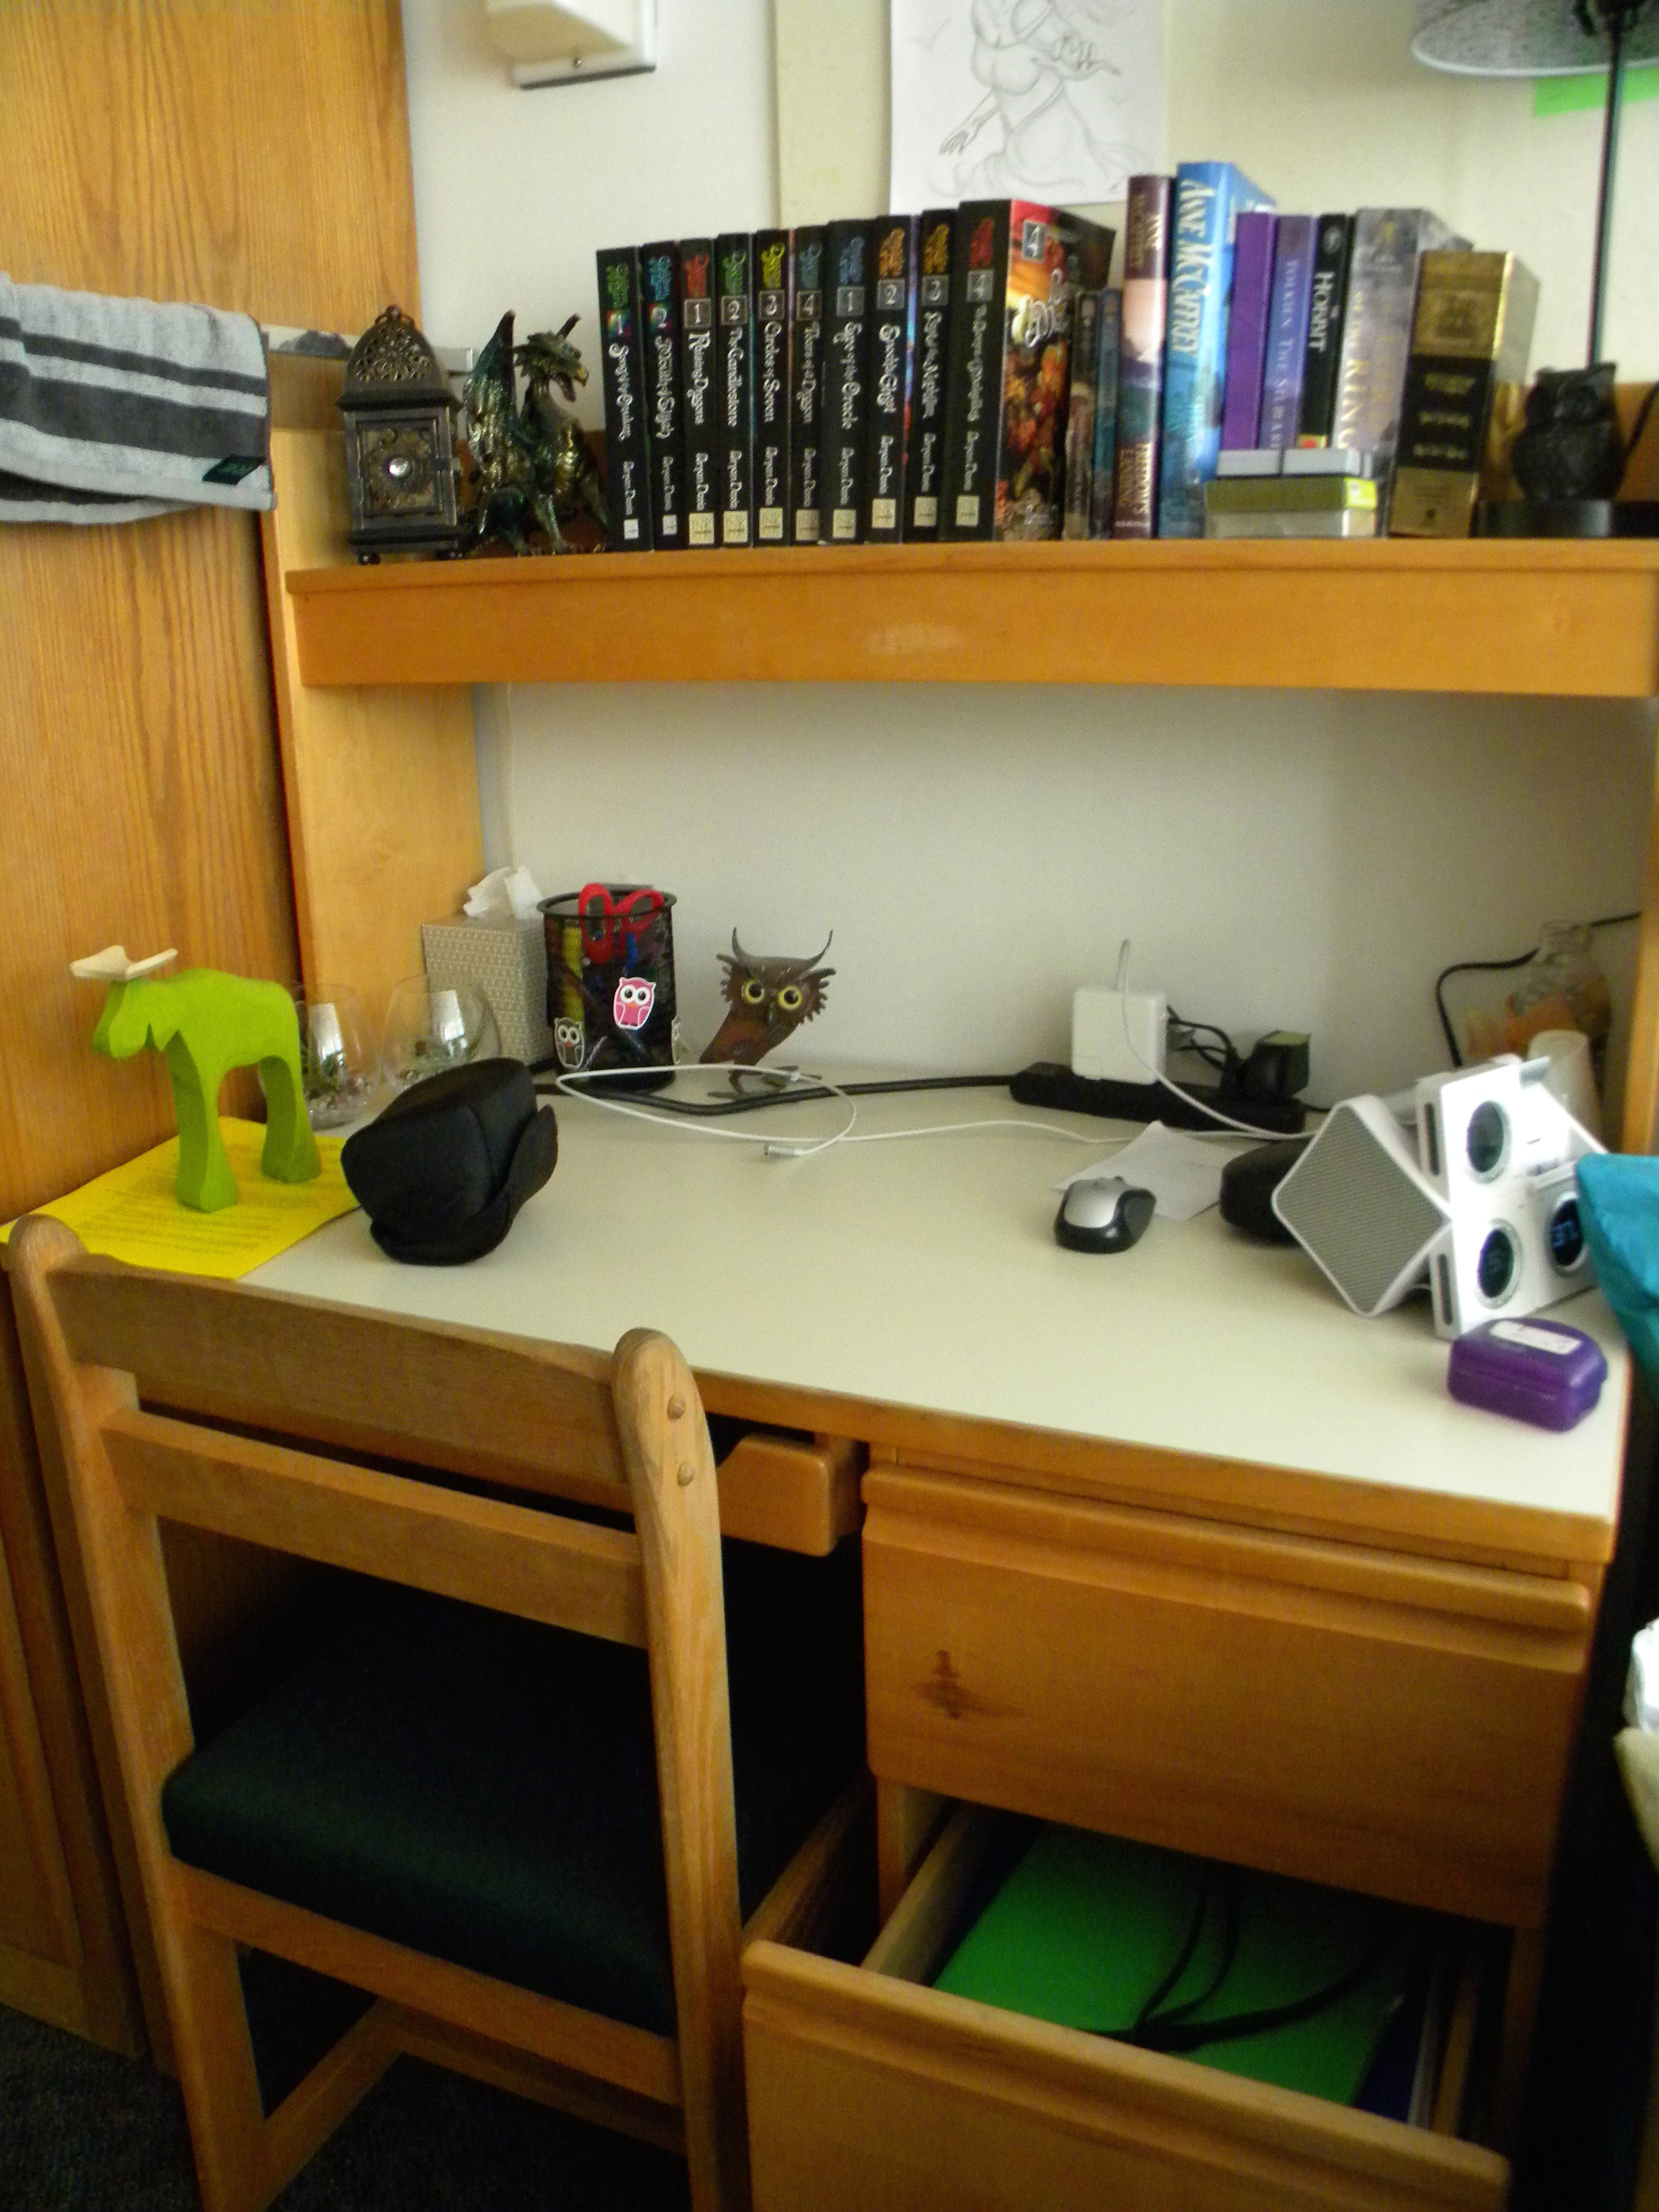 And my desk!